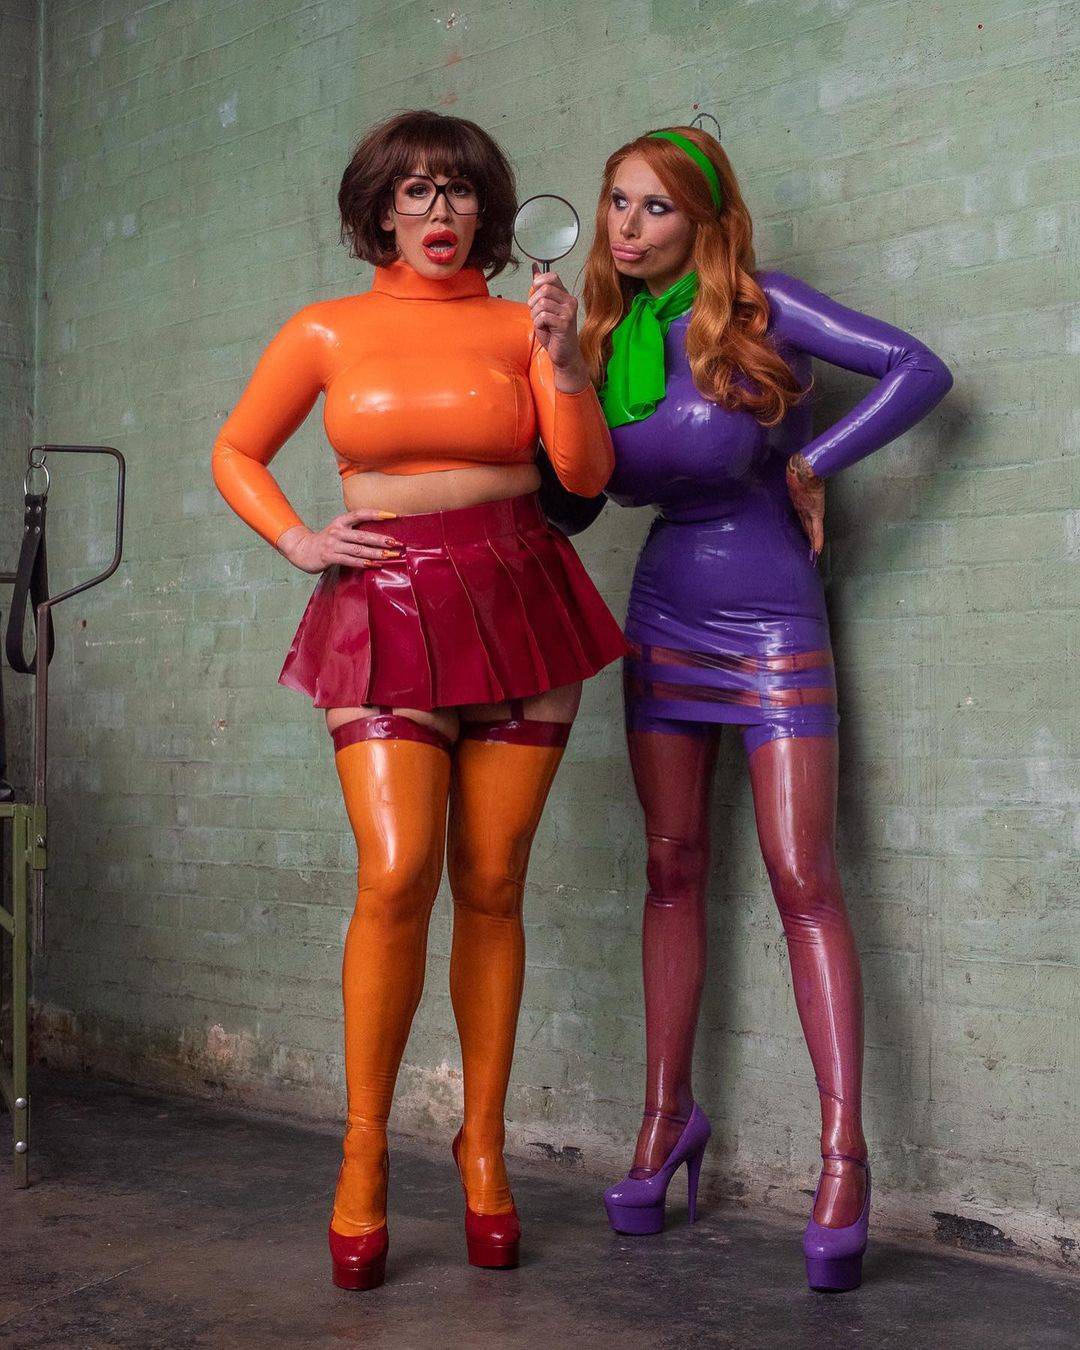 Rebecca Moore and Sophie Anderson as Velma and Daphne from ScoobyDoo